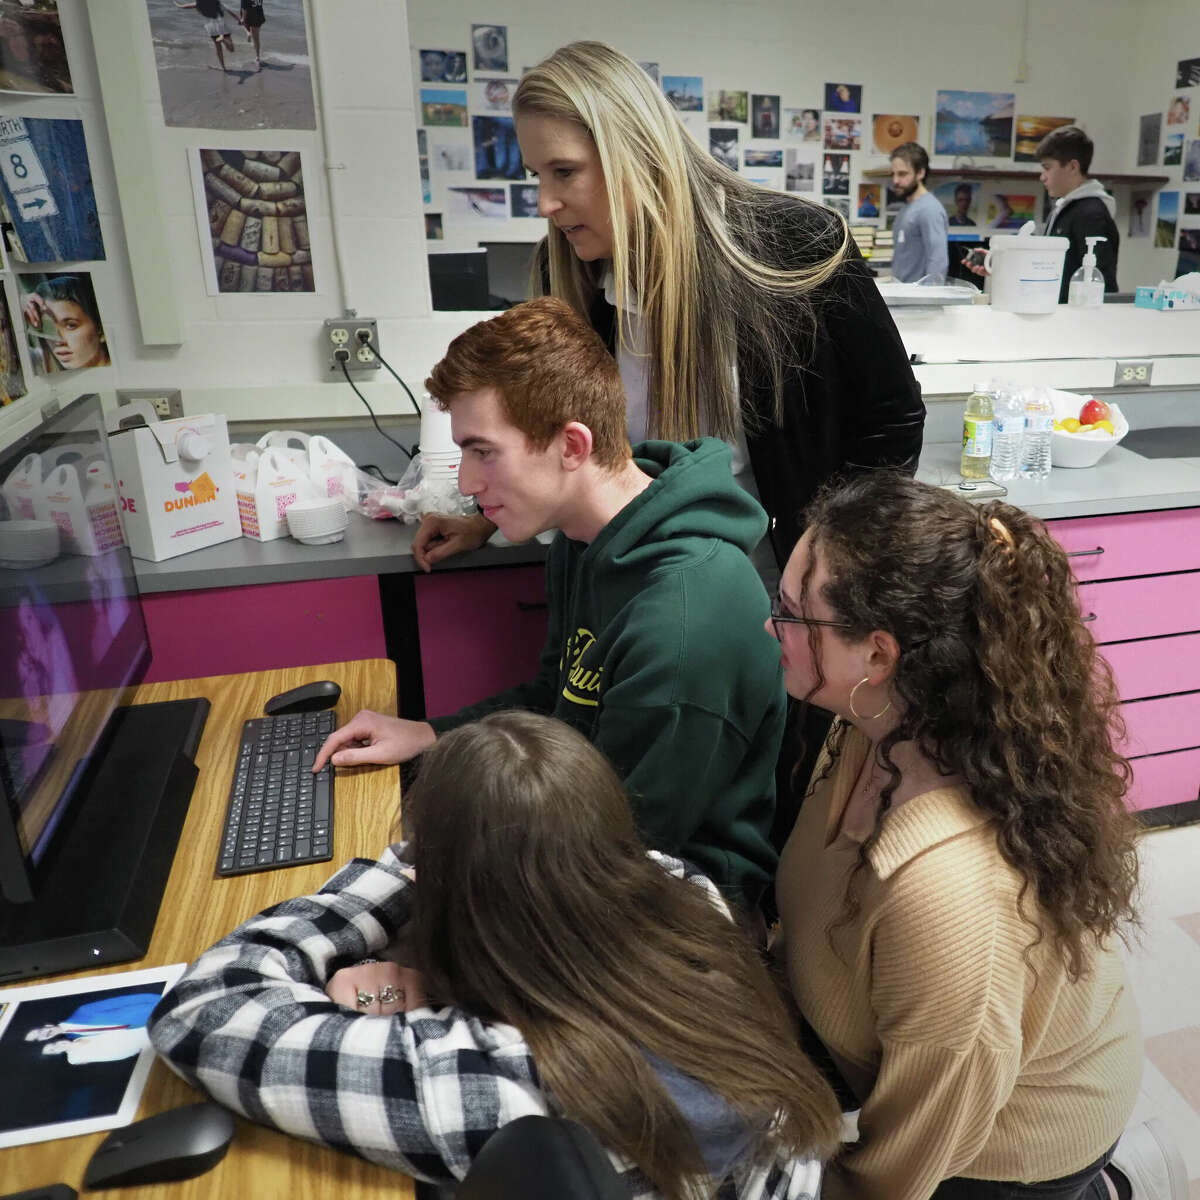 Florida photographer Krista Kowalczyk, rear, who started the restoration project, working with Amity High School students on a recent schoolday.